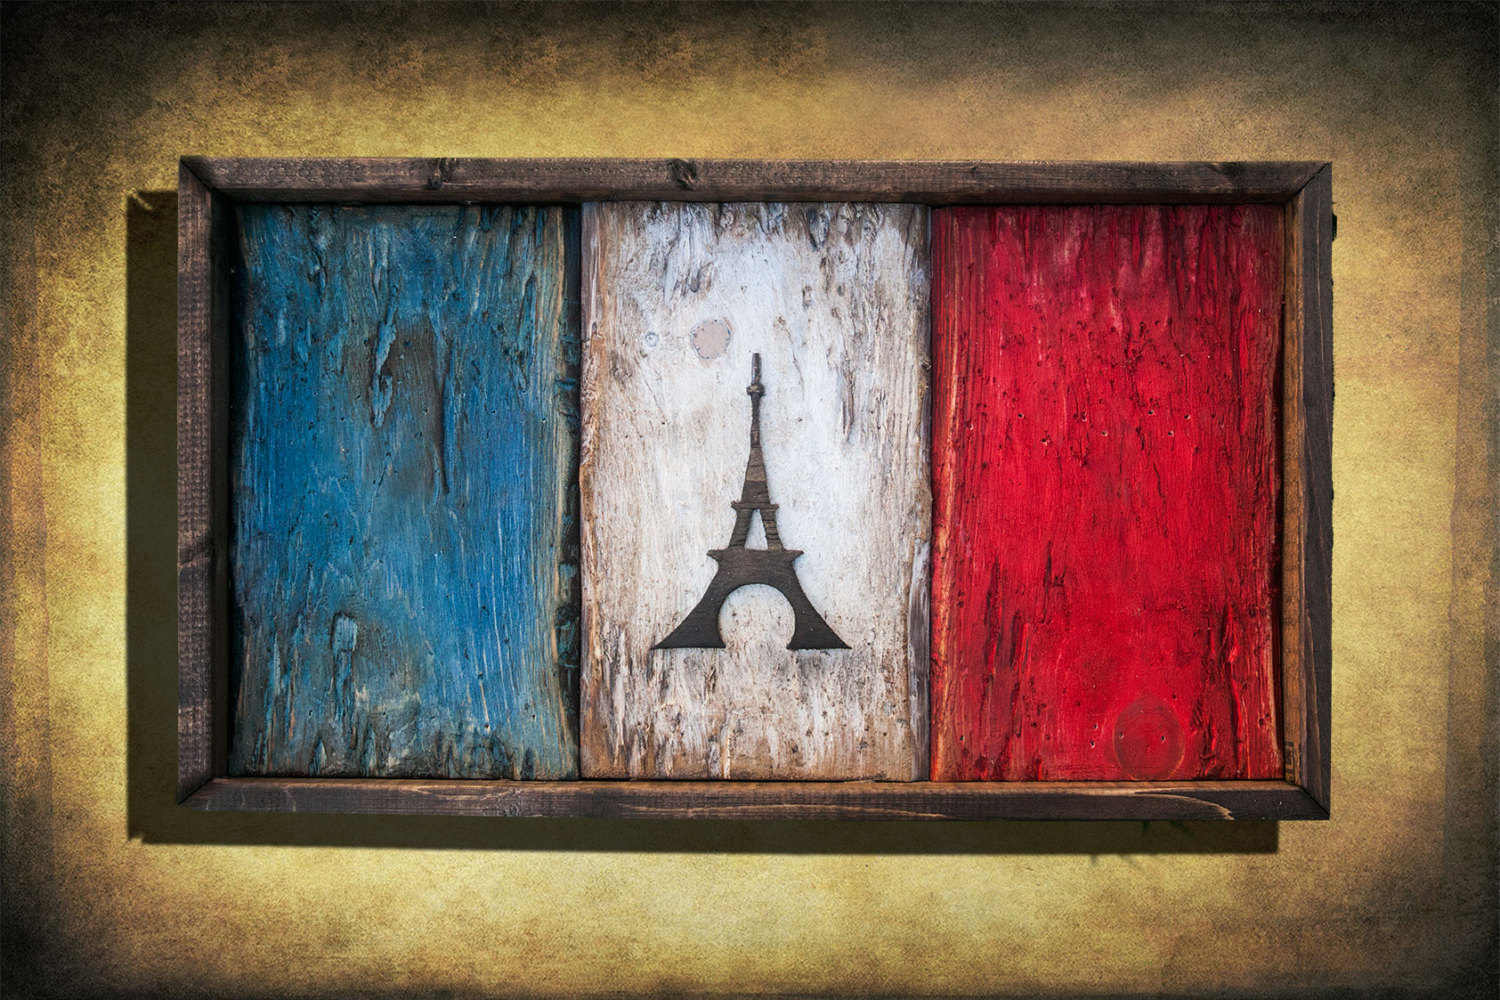 Weathered Wood One of a kind French flag, Wooden, vintage, art, distressed, weathered, recycled, Europe art flag art. France, Red White Blue